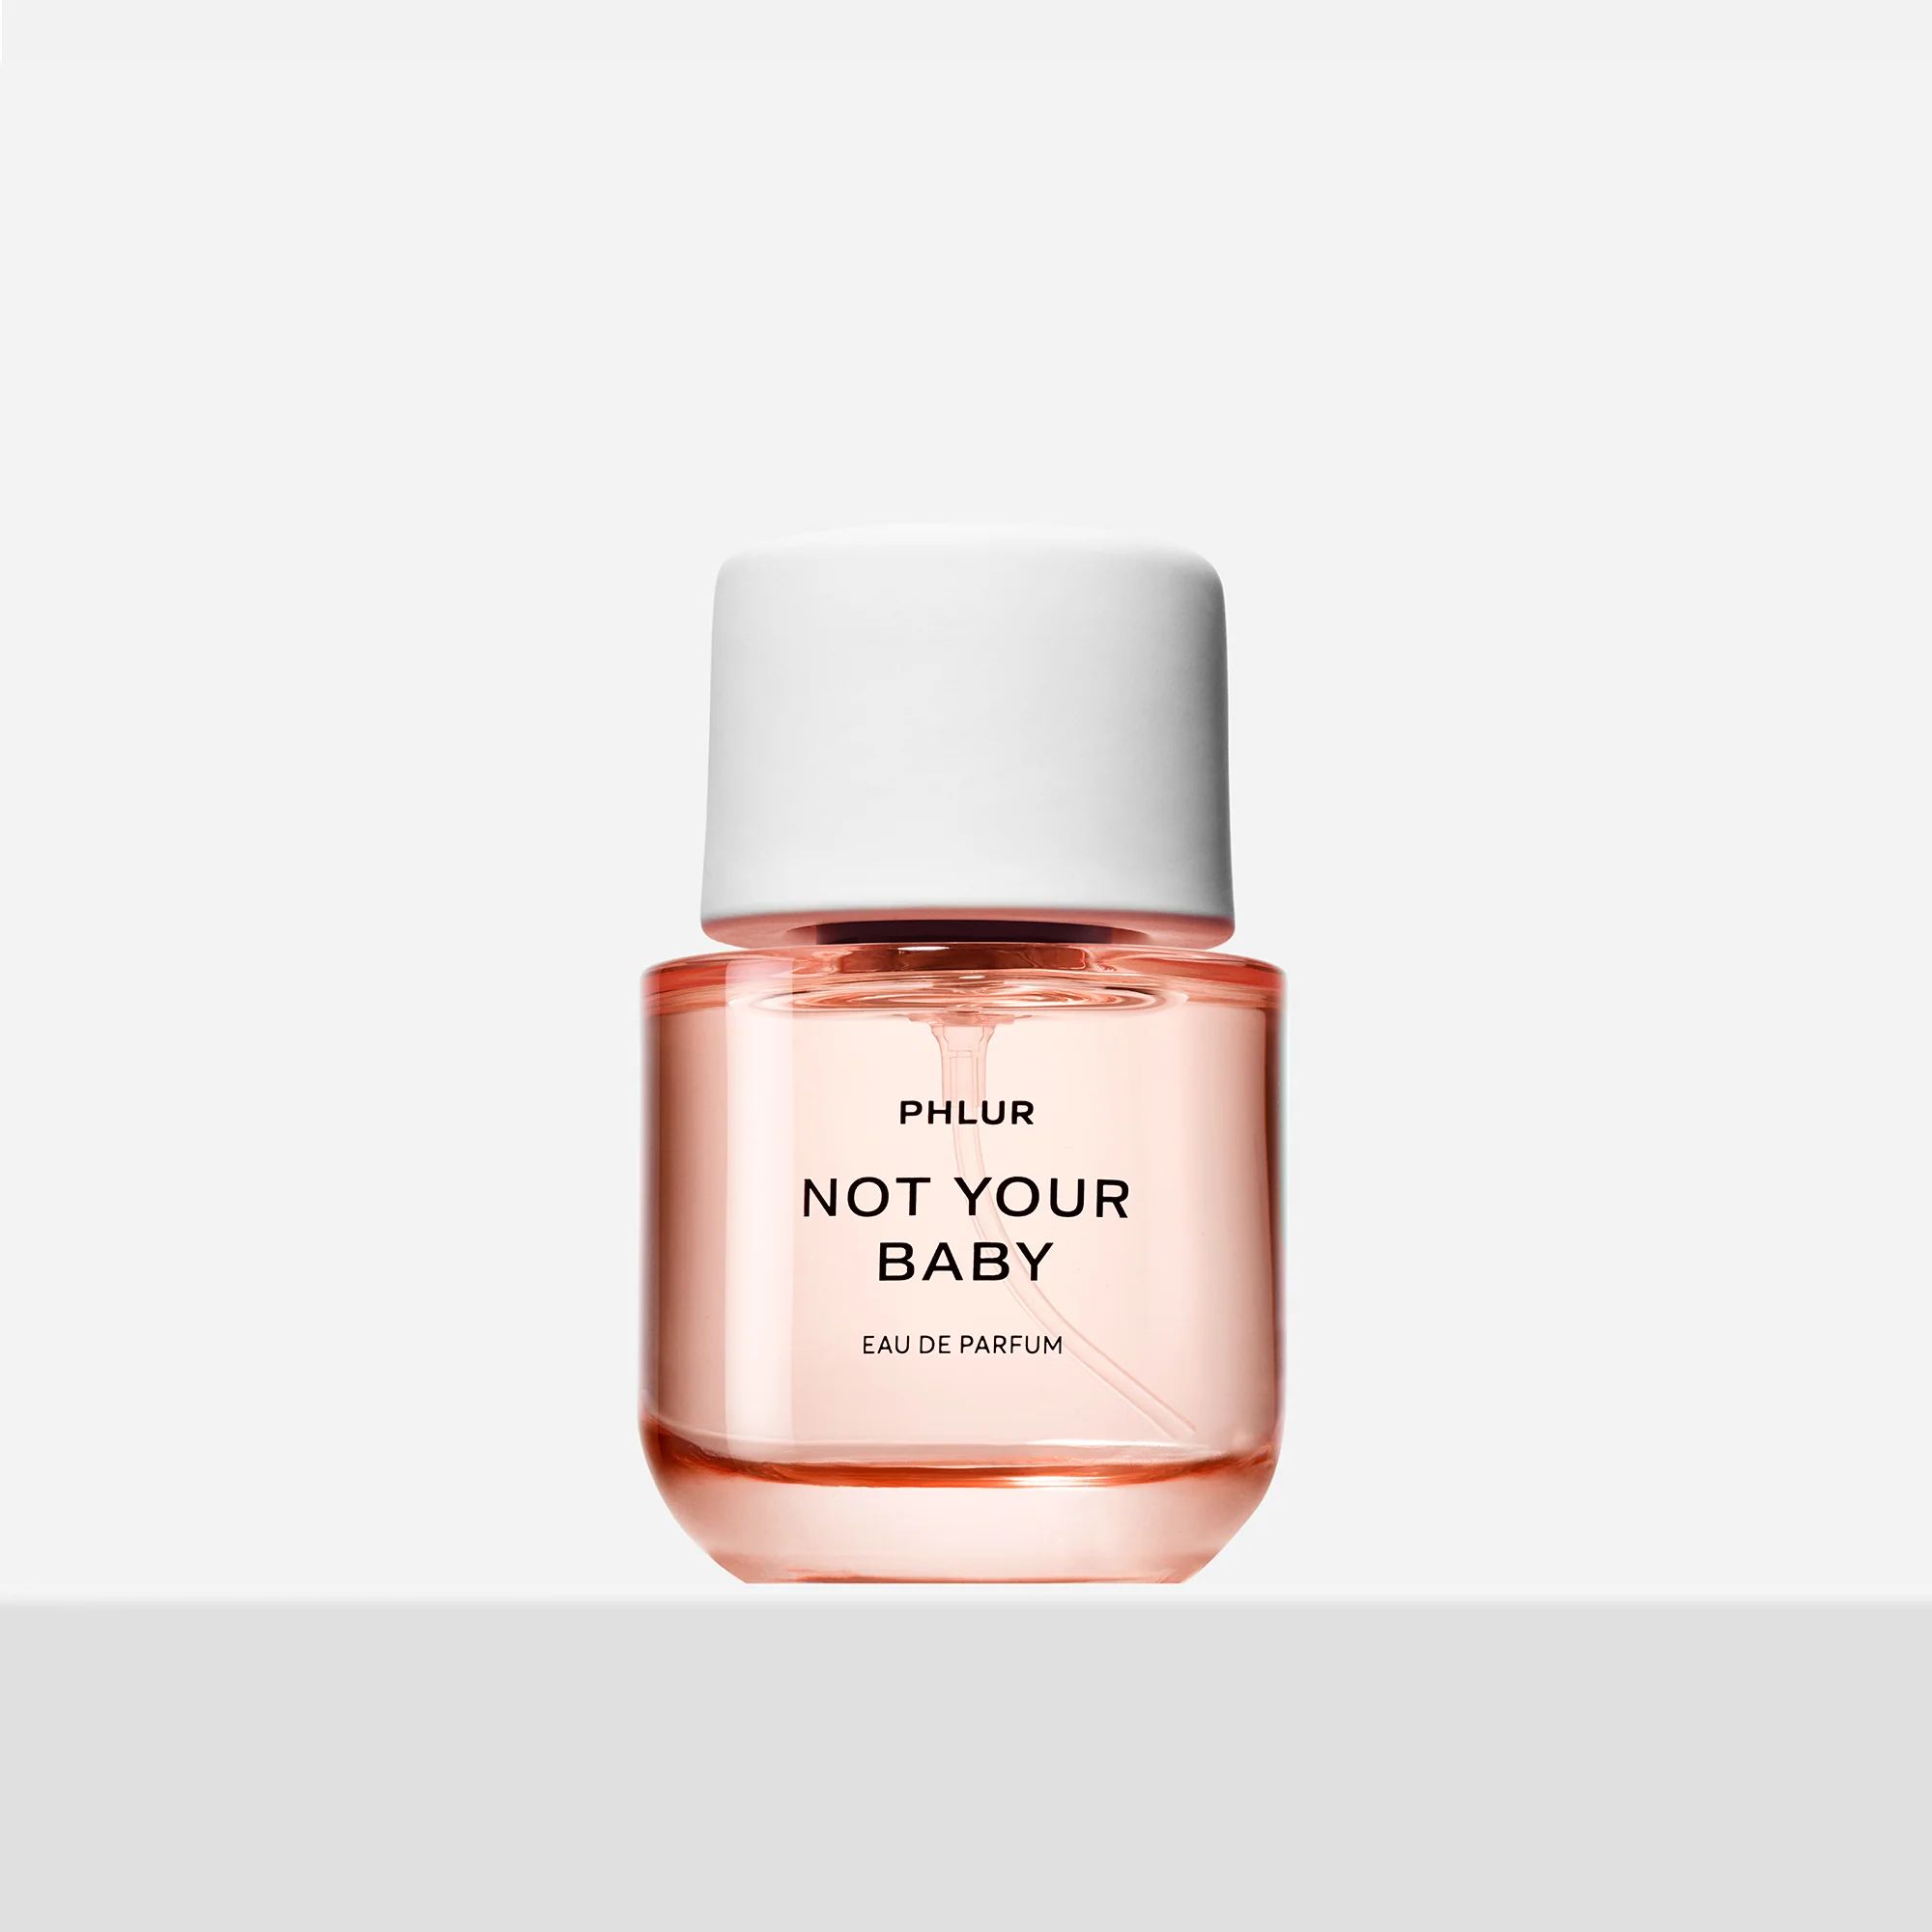 Not Your Baby Perfume - Full Size Fragrance - Phlur | PHLUR